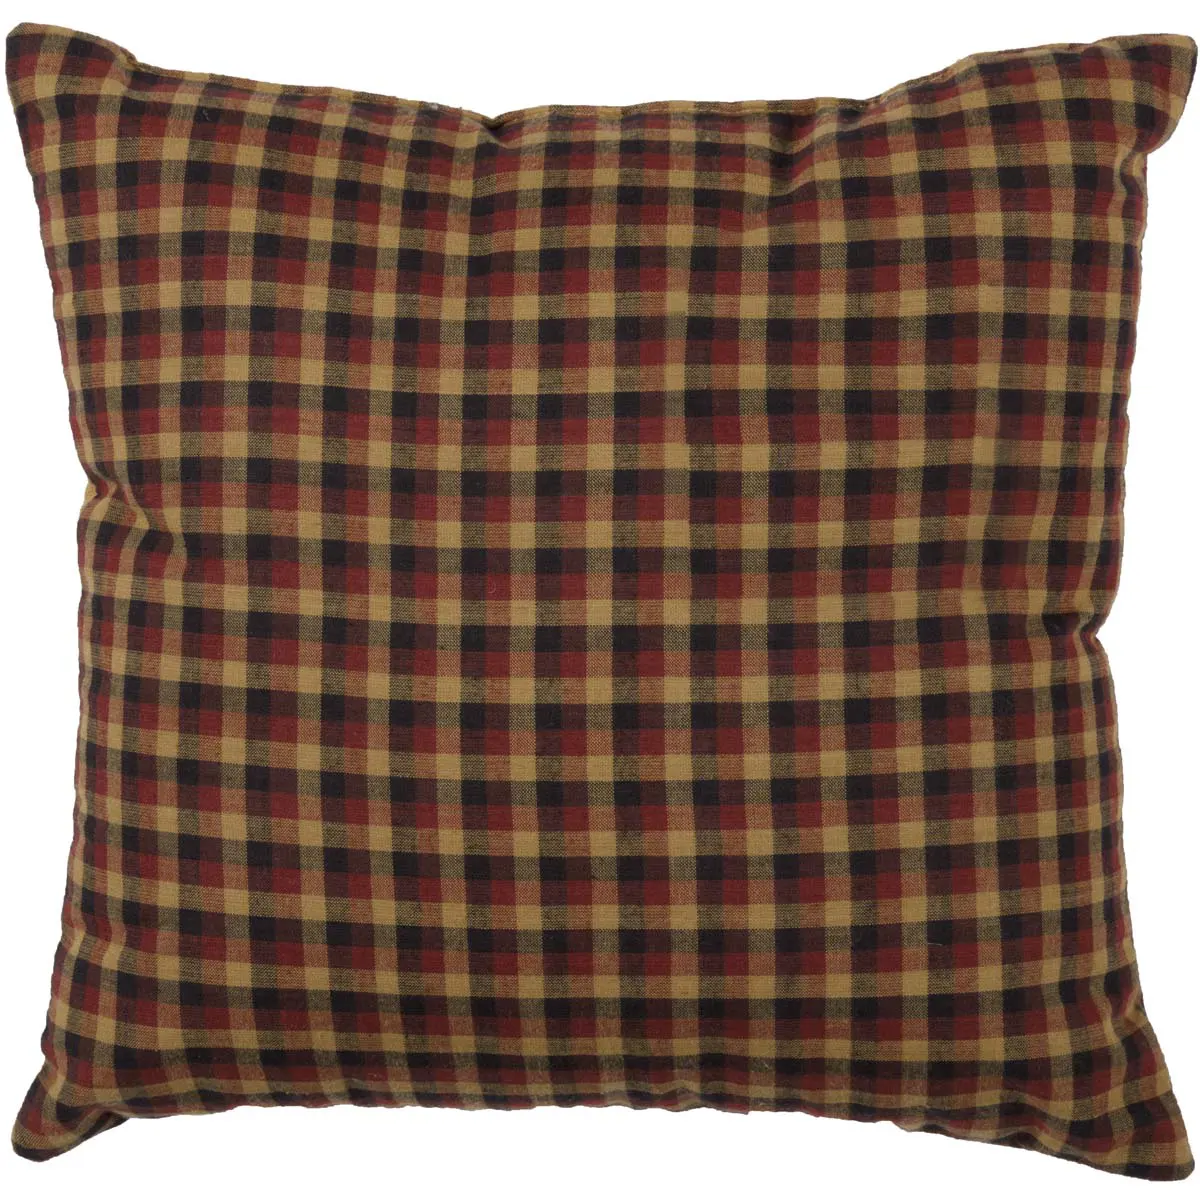 Heritage Farms Hope Pillow 12x12 back